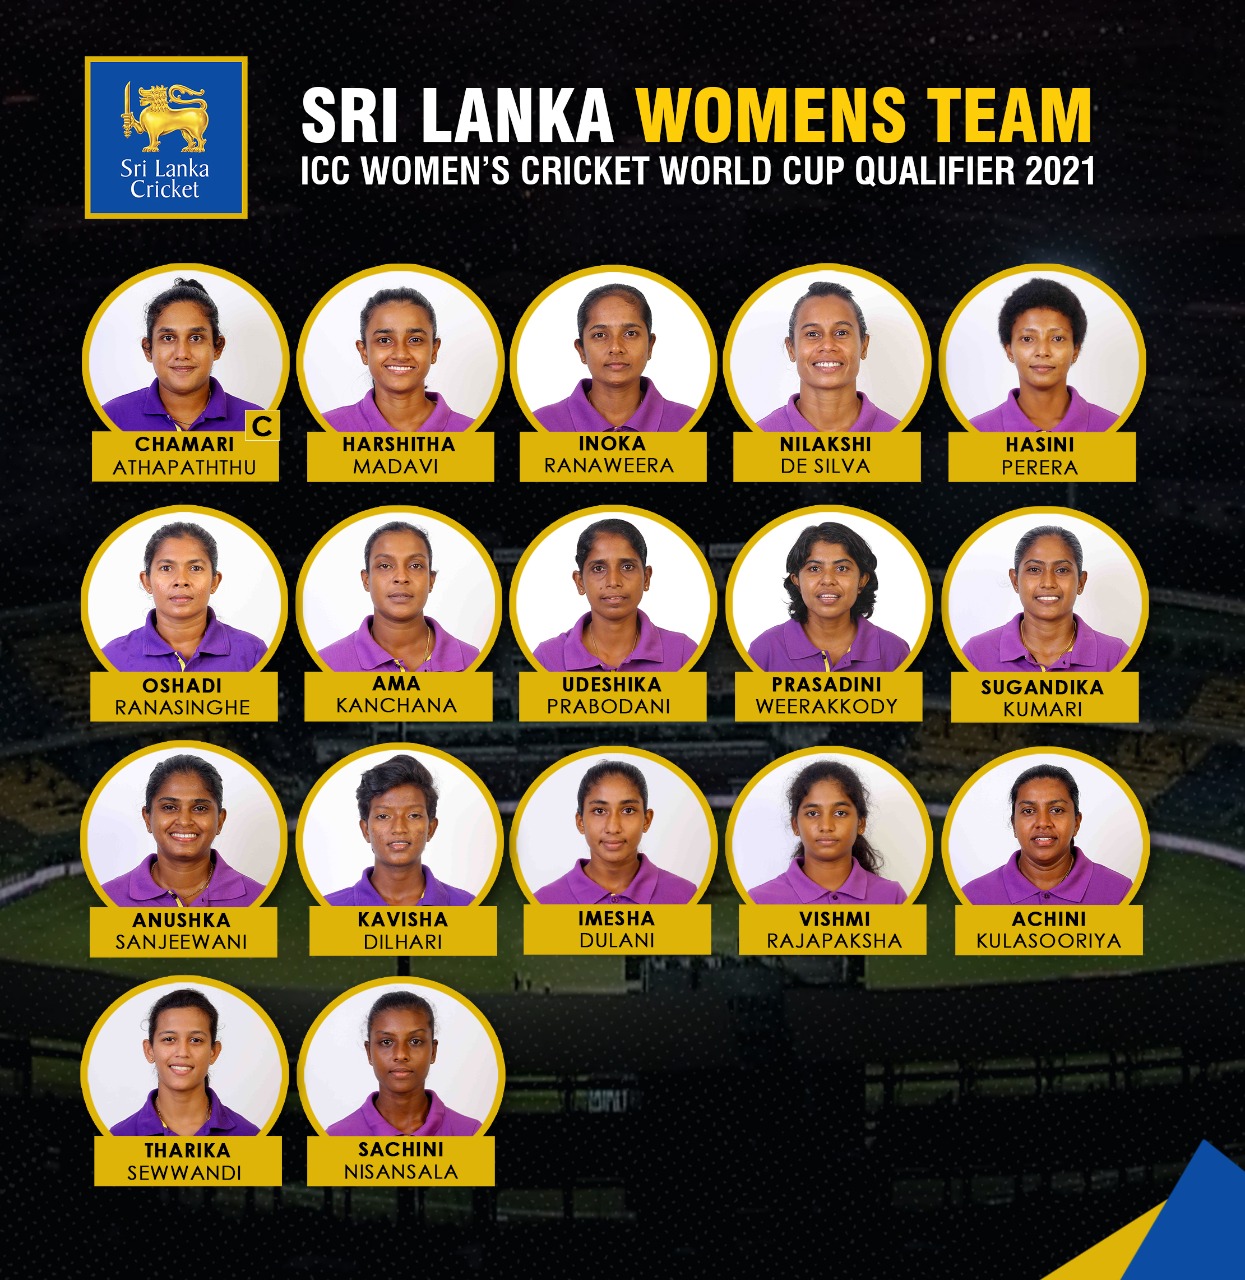 Sri Lanka Squad for the Women’s World Cup Qualifier 2021